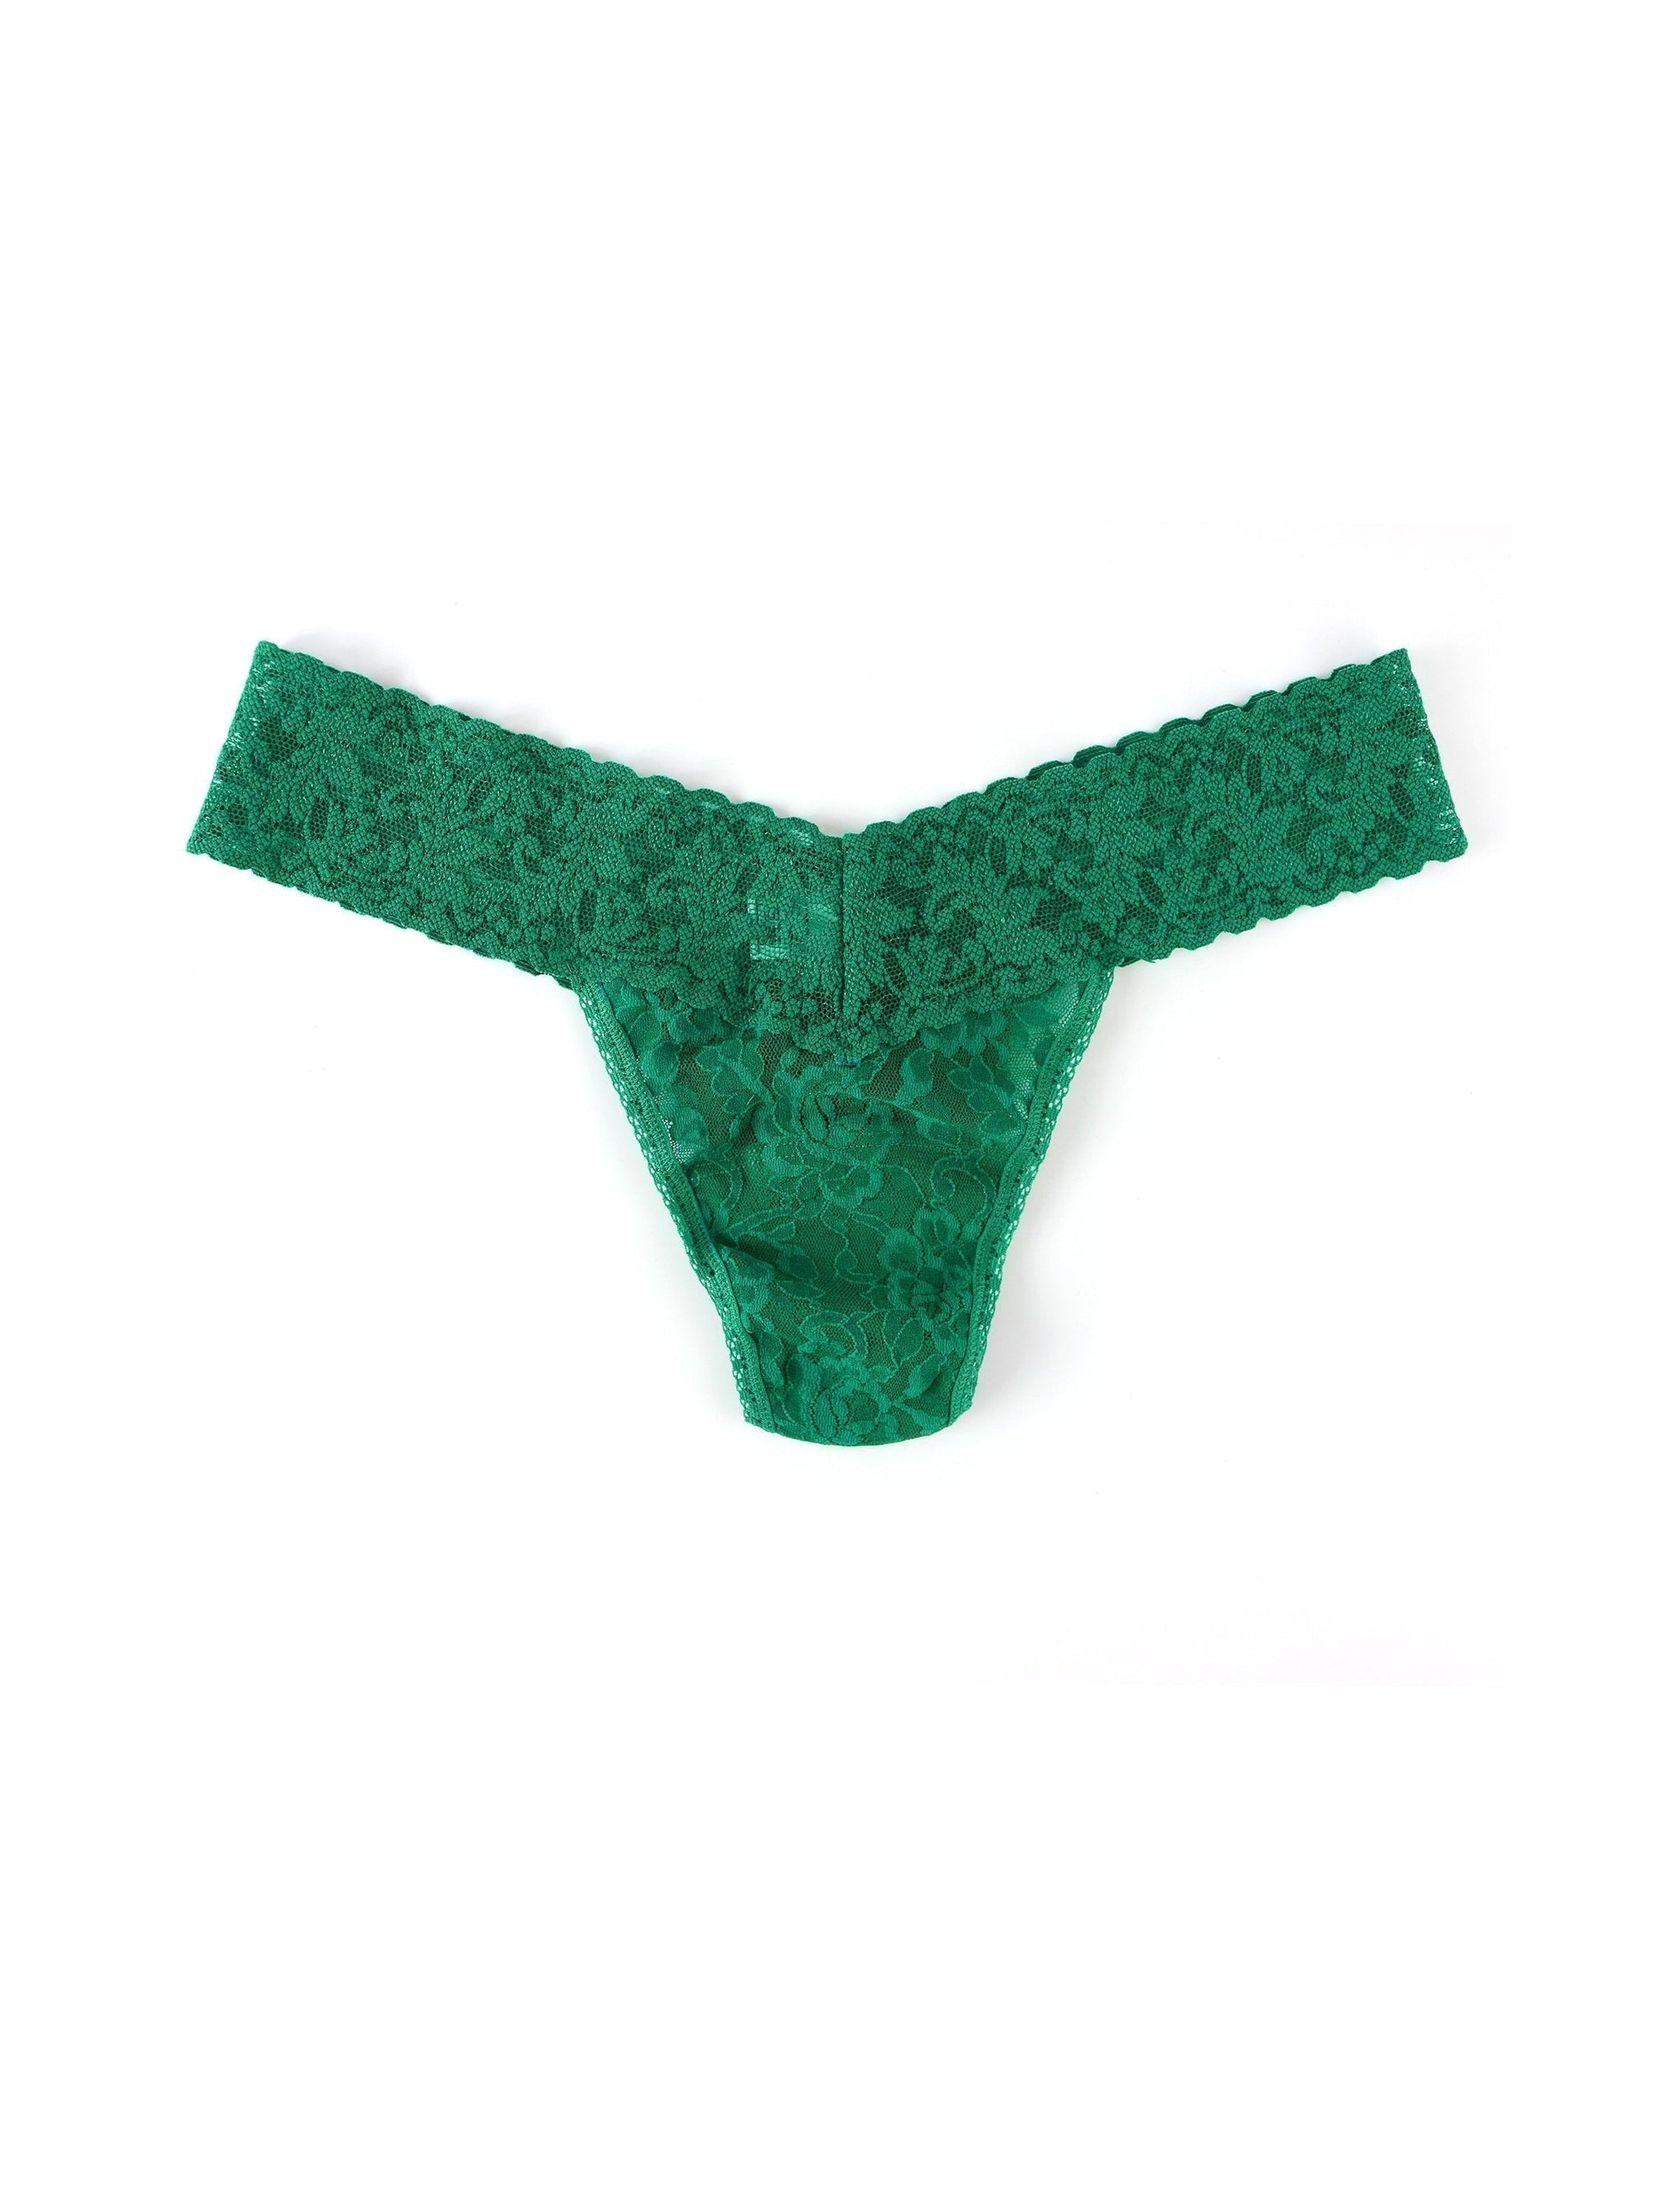 Signature Lace Low Rise Thong-Hanky Panky